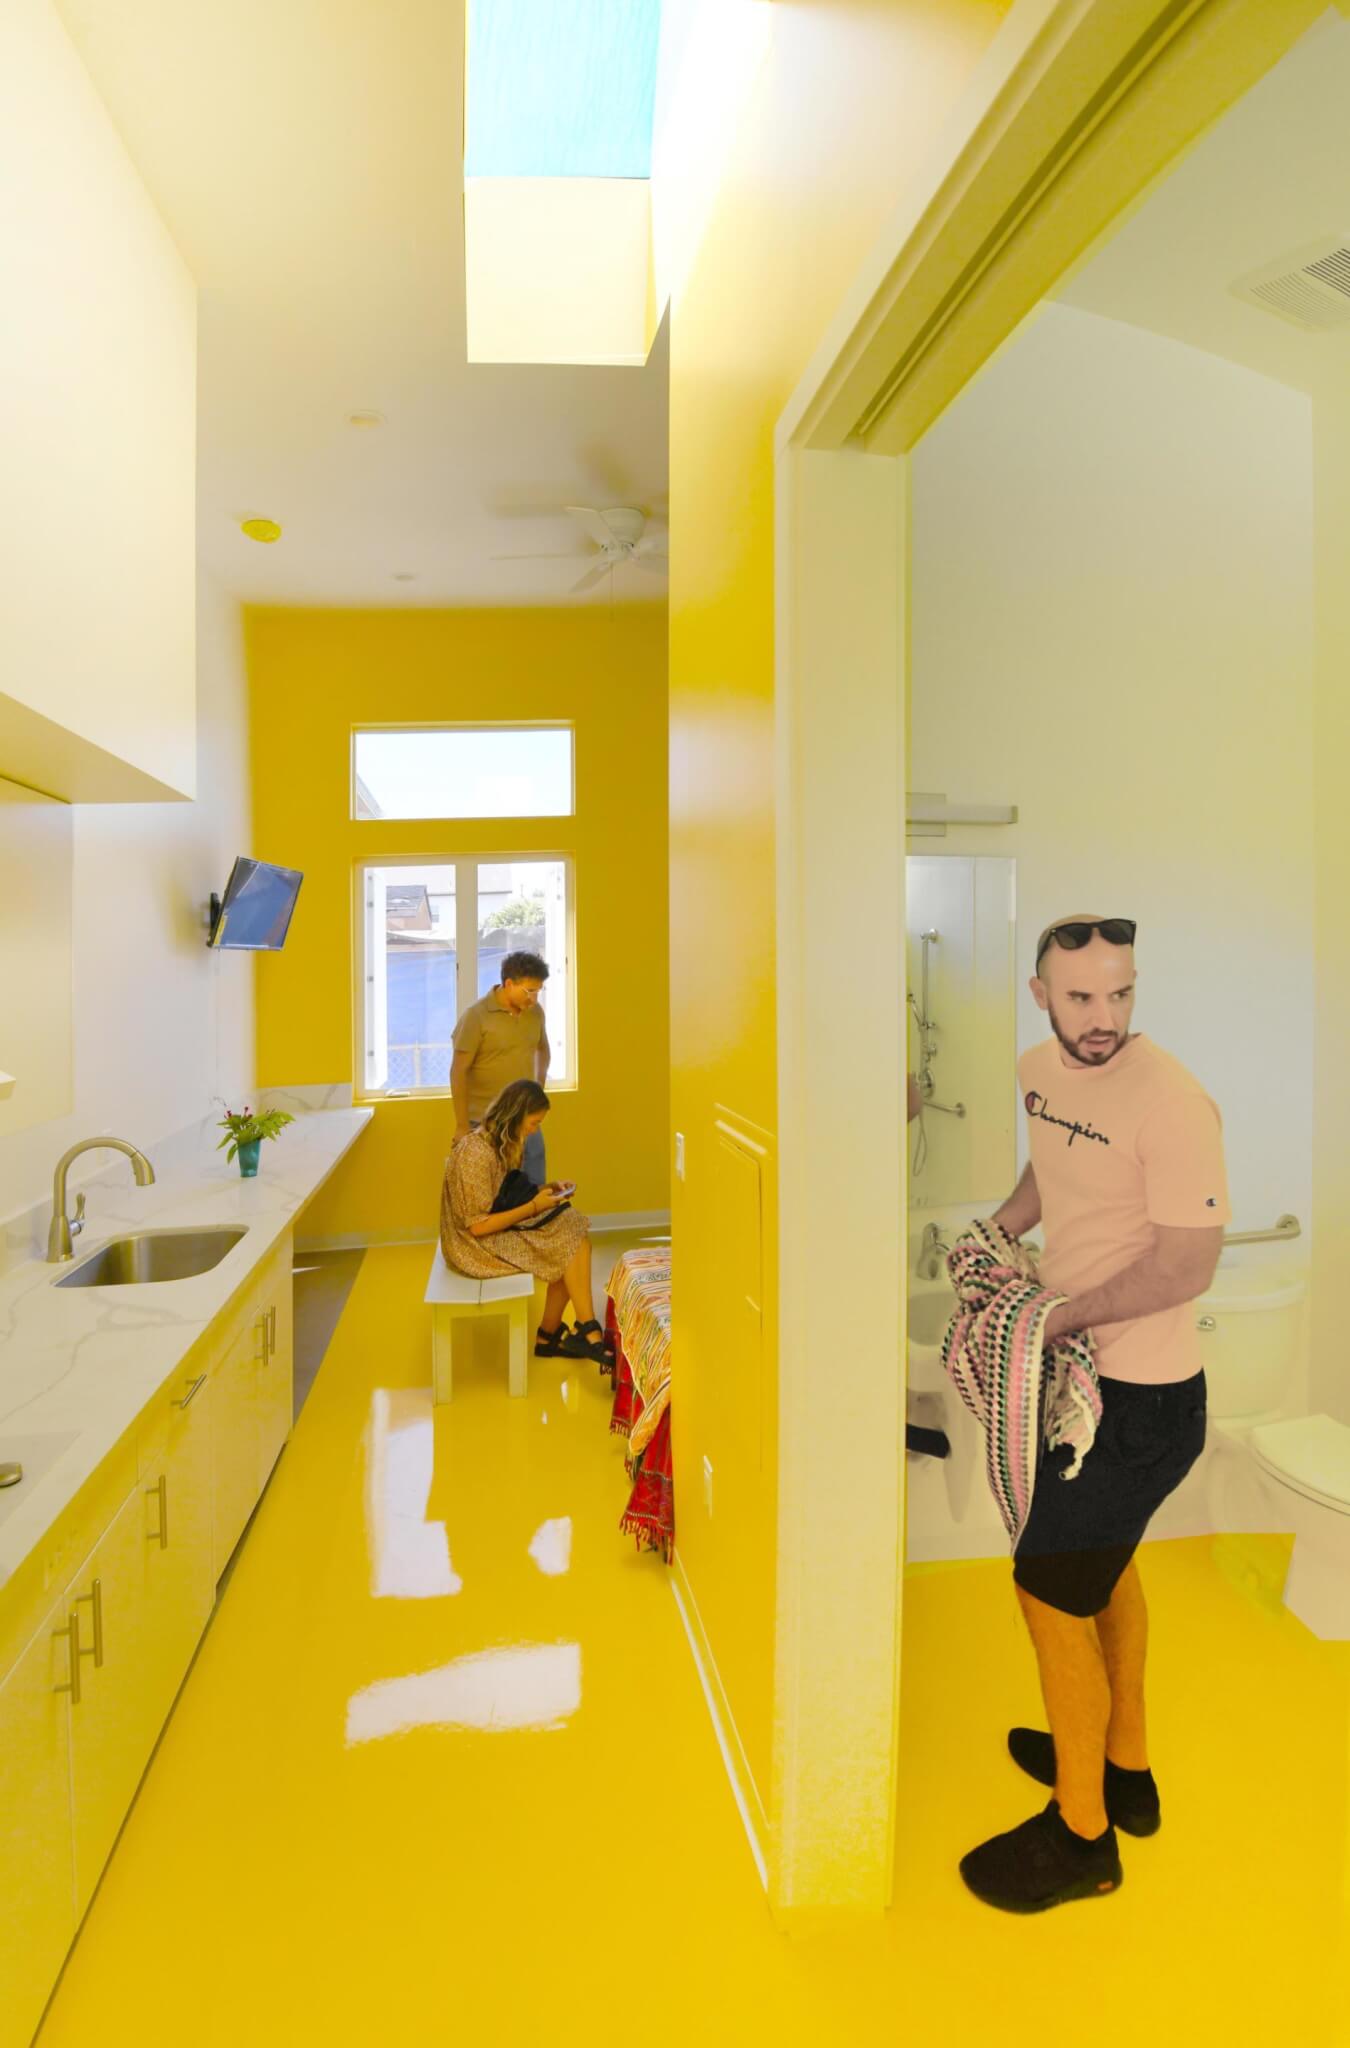 inside a small residential unit painted bright yellow